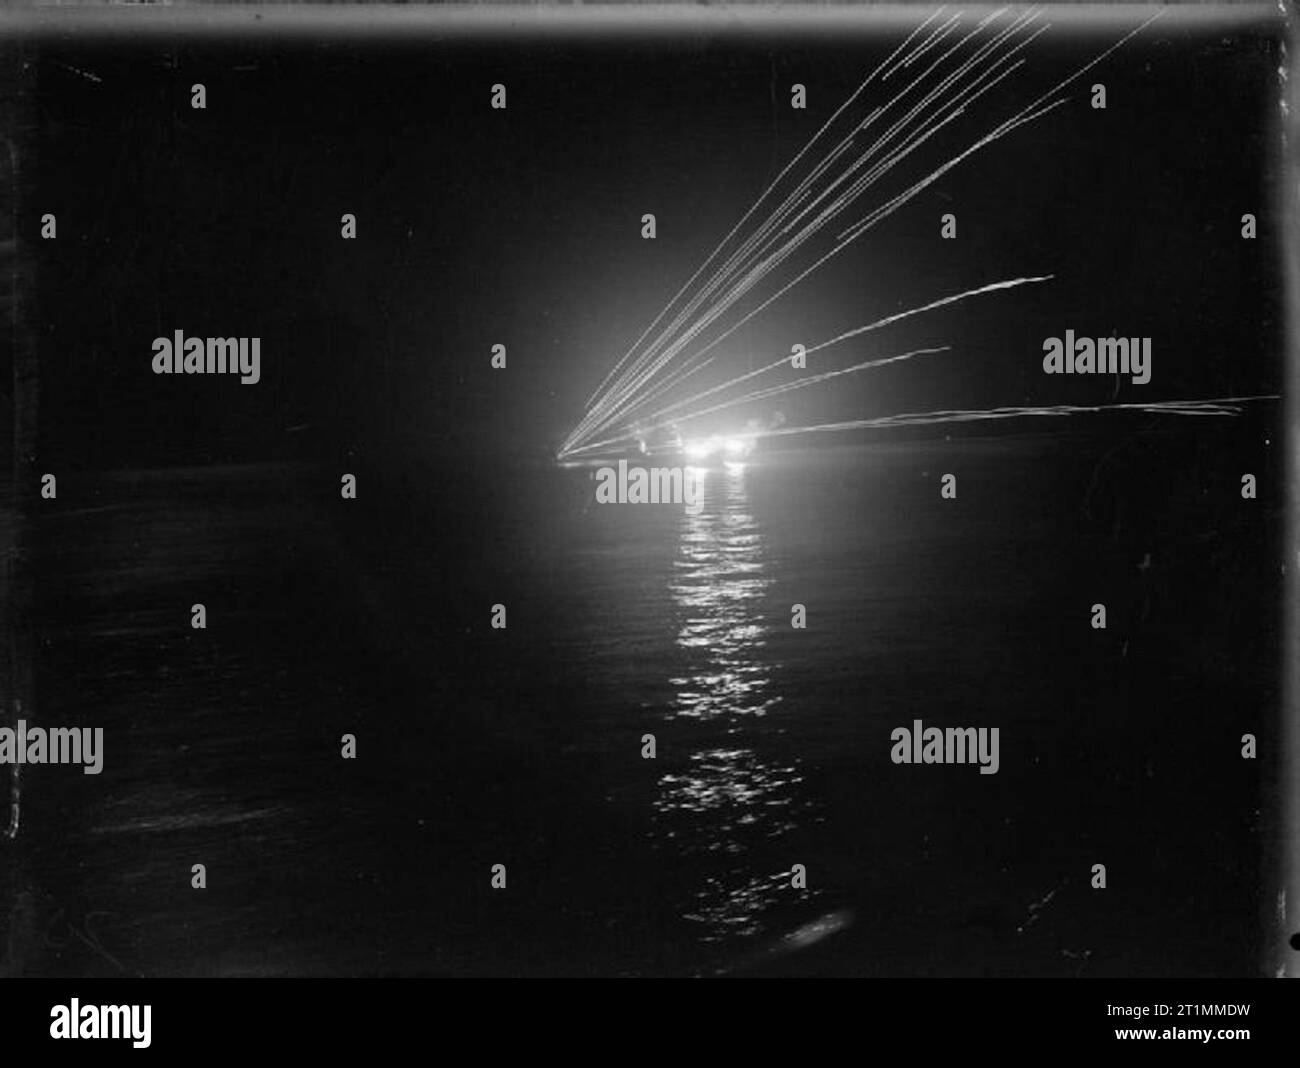 The Royal Navy during the Second World War Salerno, 9 September 1943 (Operation Avalanche): During Operation AVALANCHE, a night photograph taken from the battleship WARSPITE during the landings, showing the effect of anti-aircraft fire from Allied warships in response to low level German aerial torpedo attack. It lasted for two hours and the destroyer INGLEFIELD shot down one of the raiders. WARSPITE successfully dodged two torpedos. Stock Photo